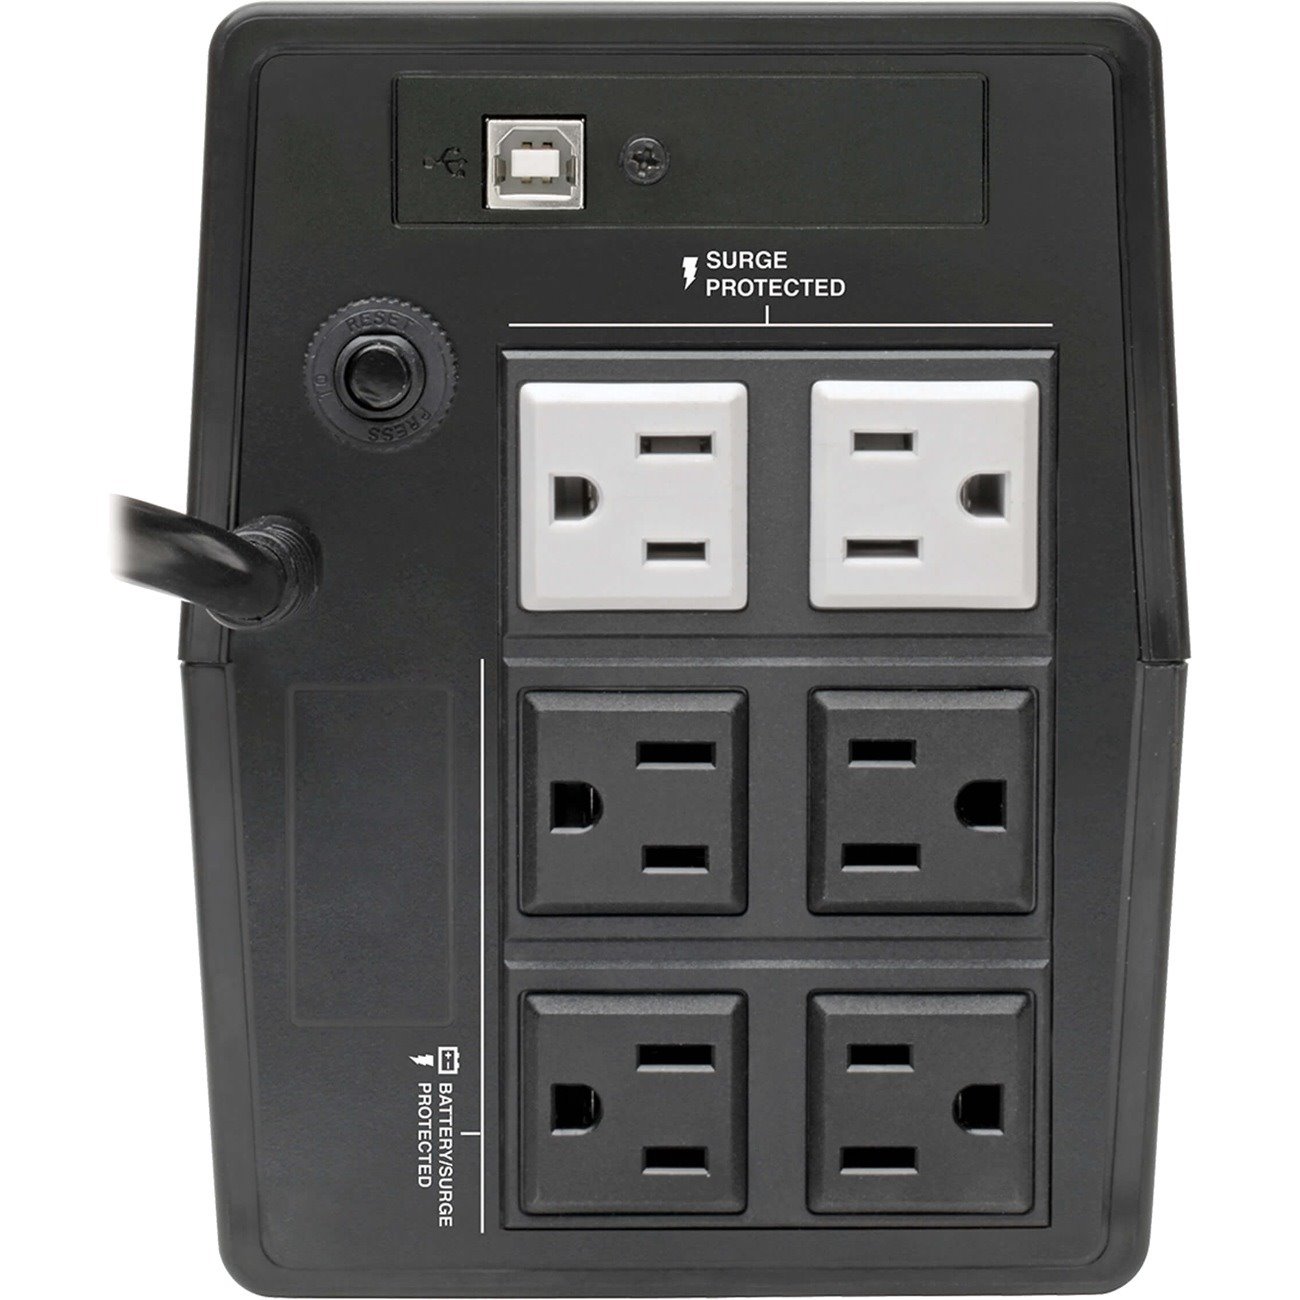 Tripp Lite by Eaton UPS 650VA 480W Line-Interactive UPS with 6 Outlets - AVR 120V 50/60 Hz USB Tower